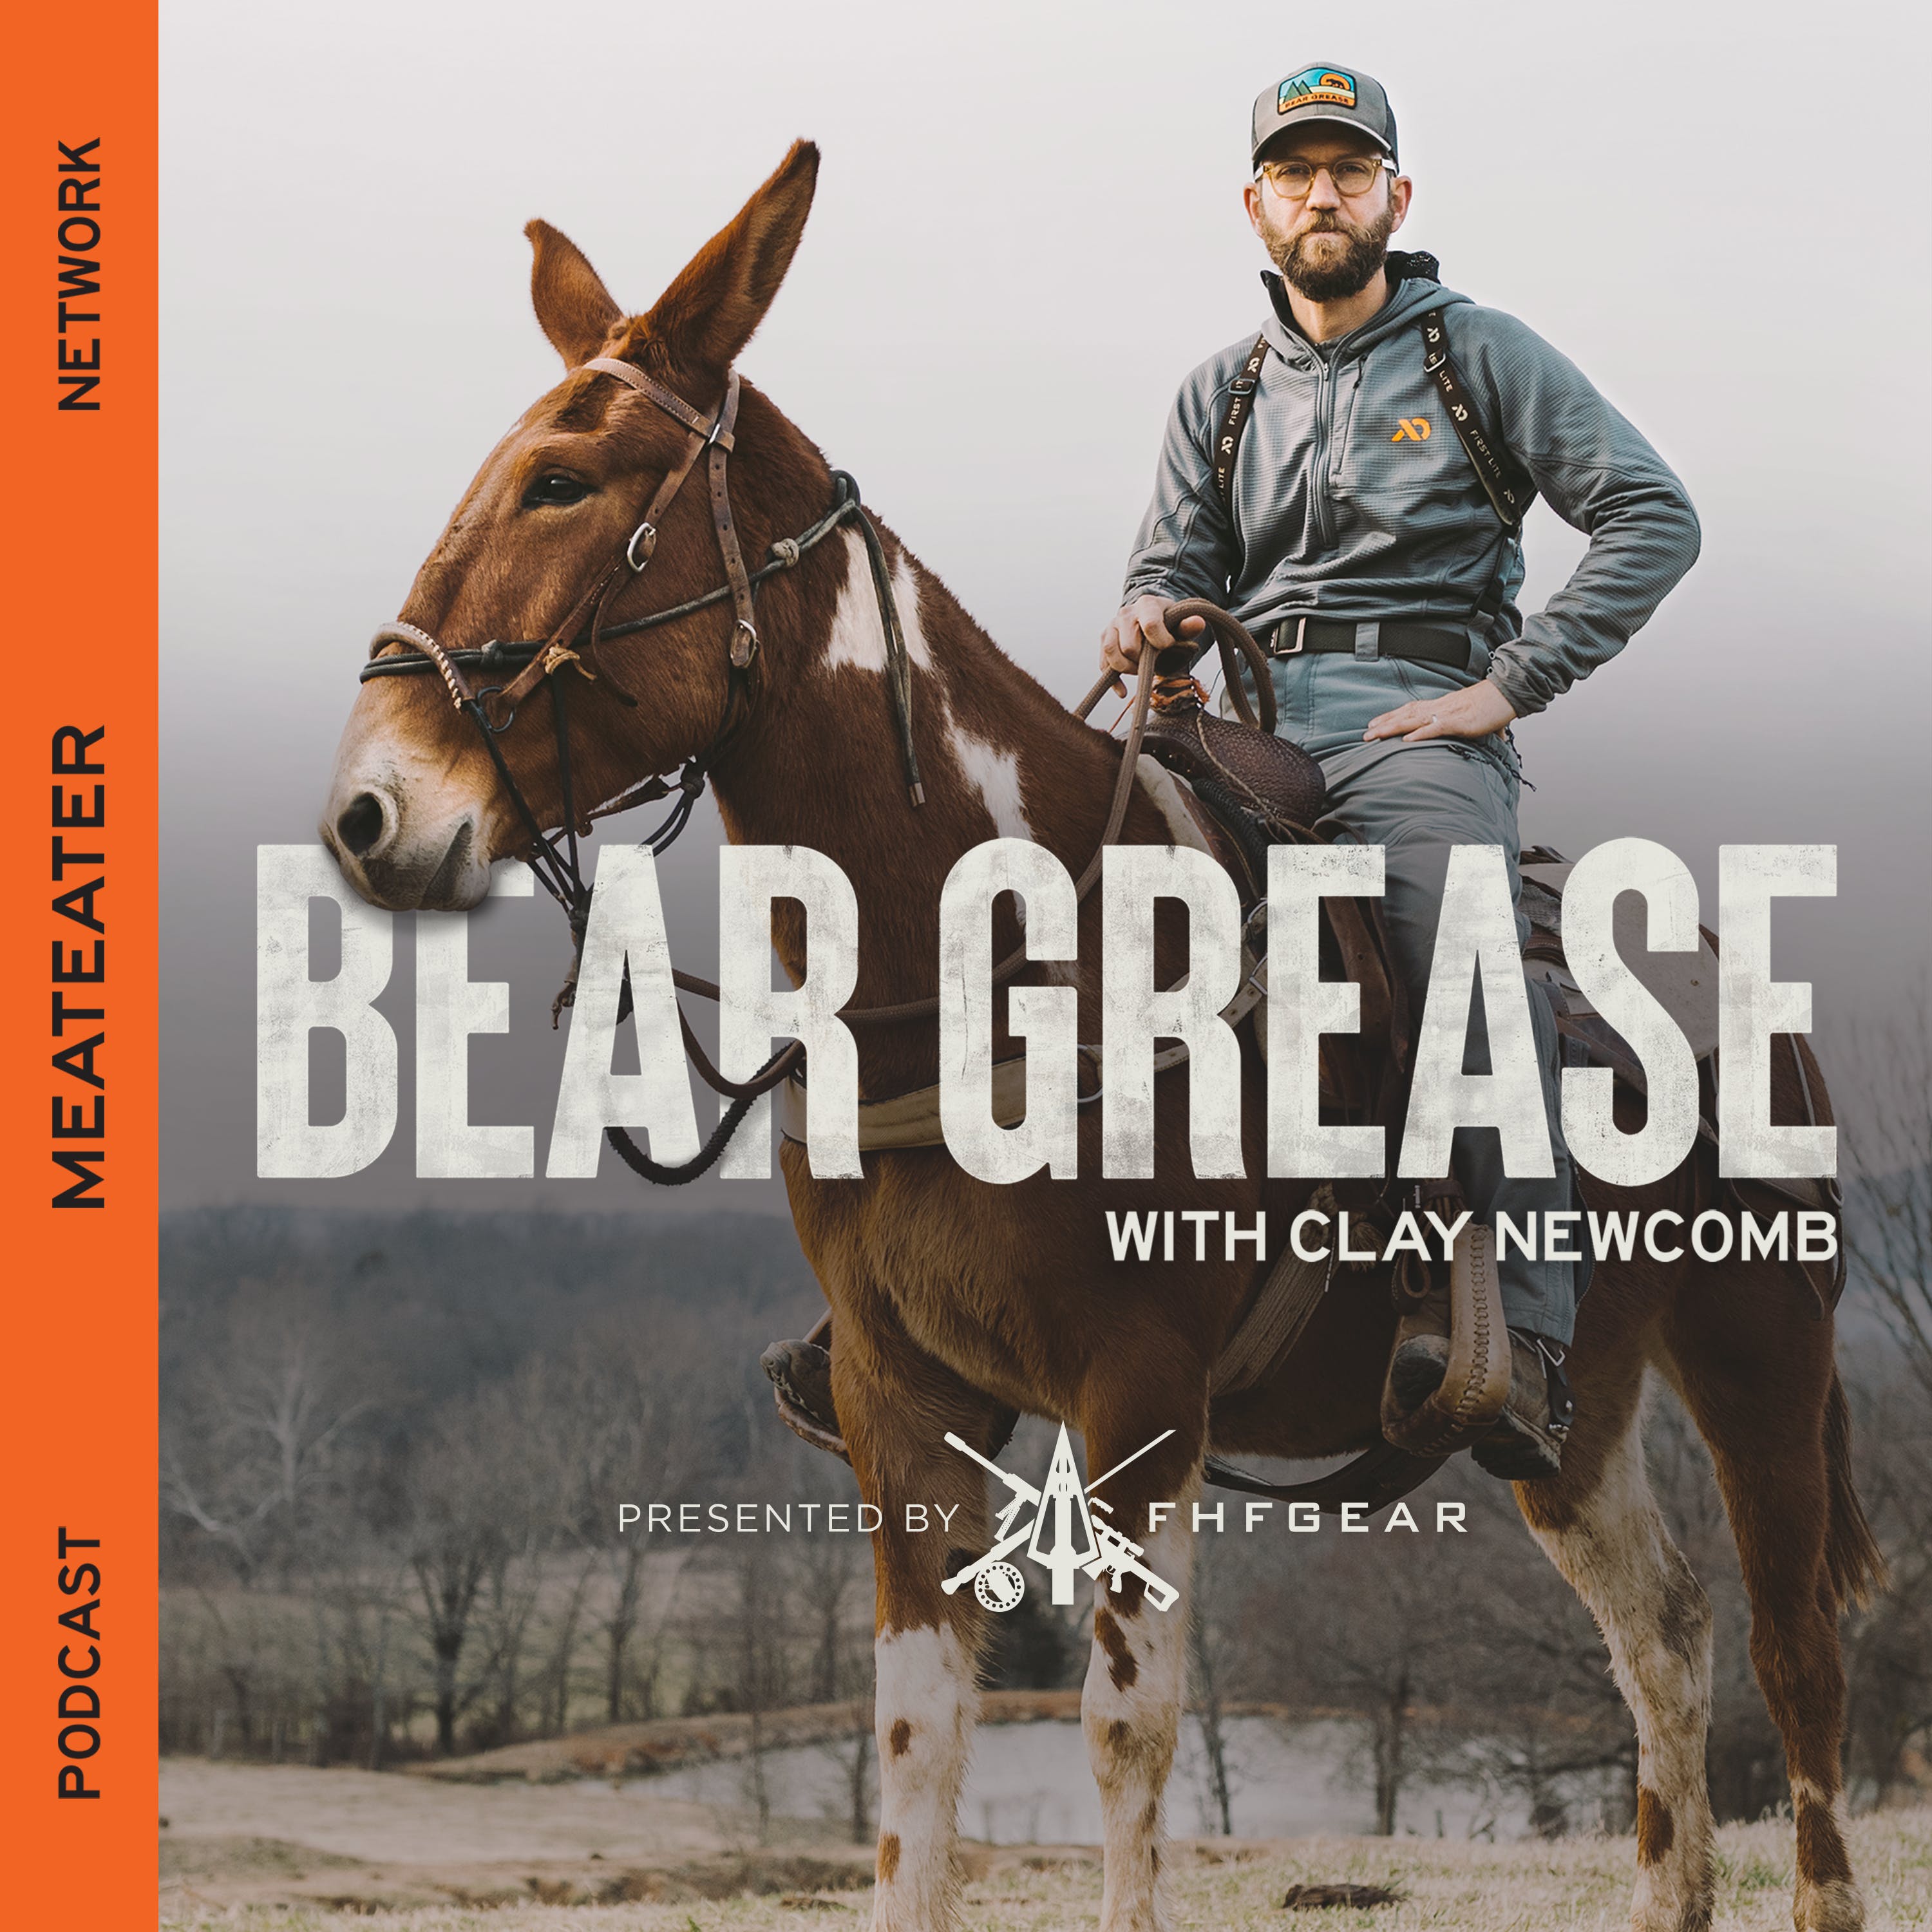 Ep. 170: Bear Grease Classics: The Myth of the Southern Mountain Lion